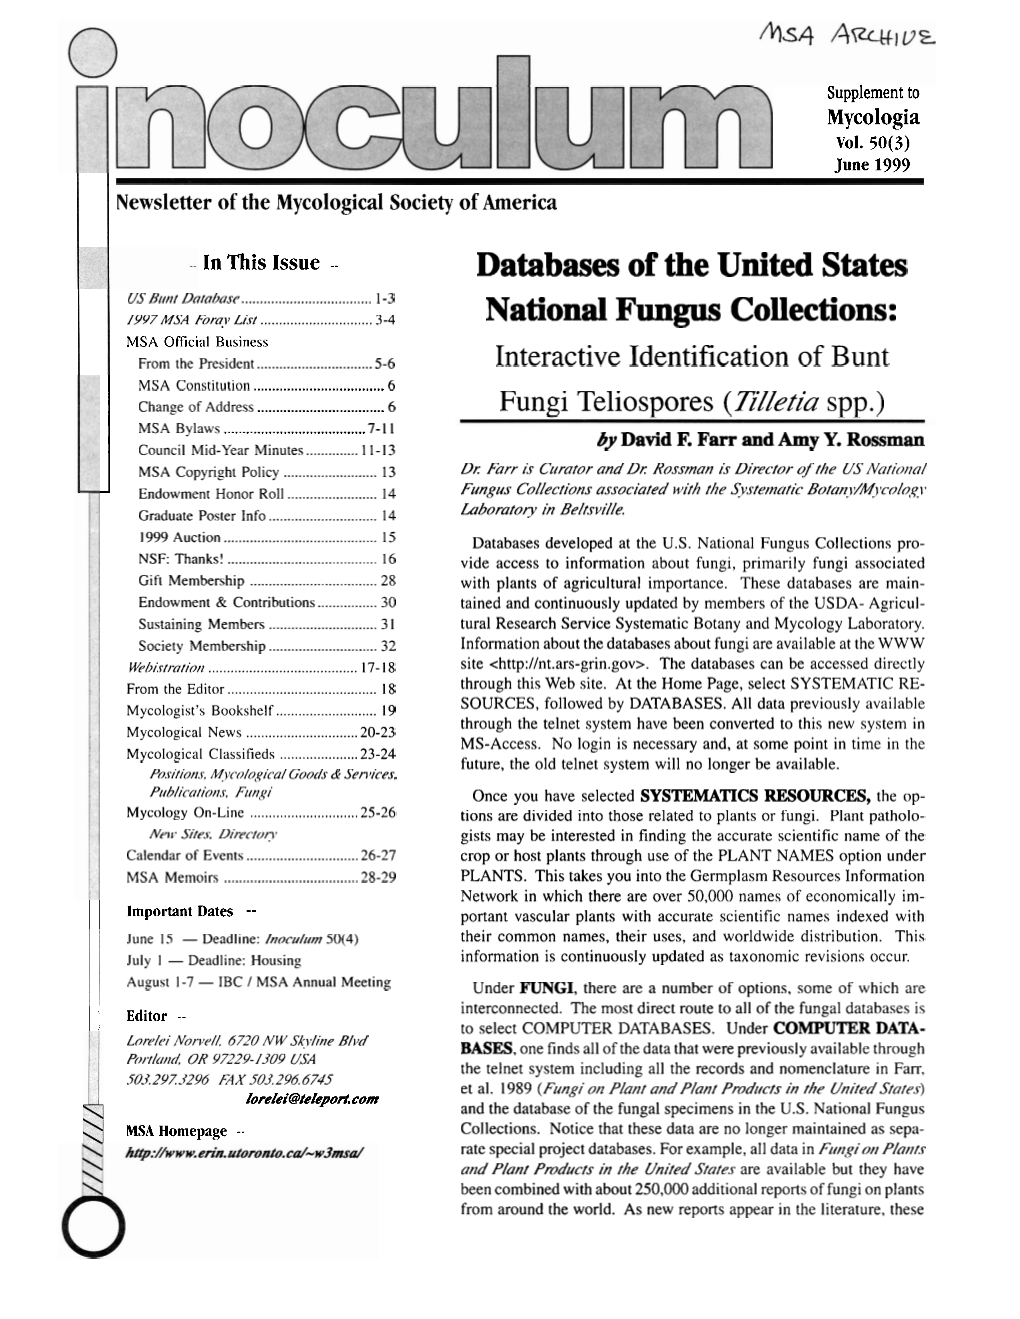 Databases of the United States National Bgus Collections